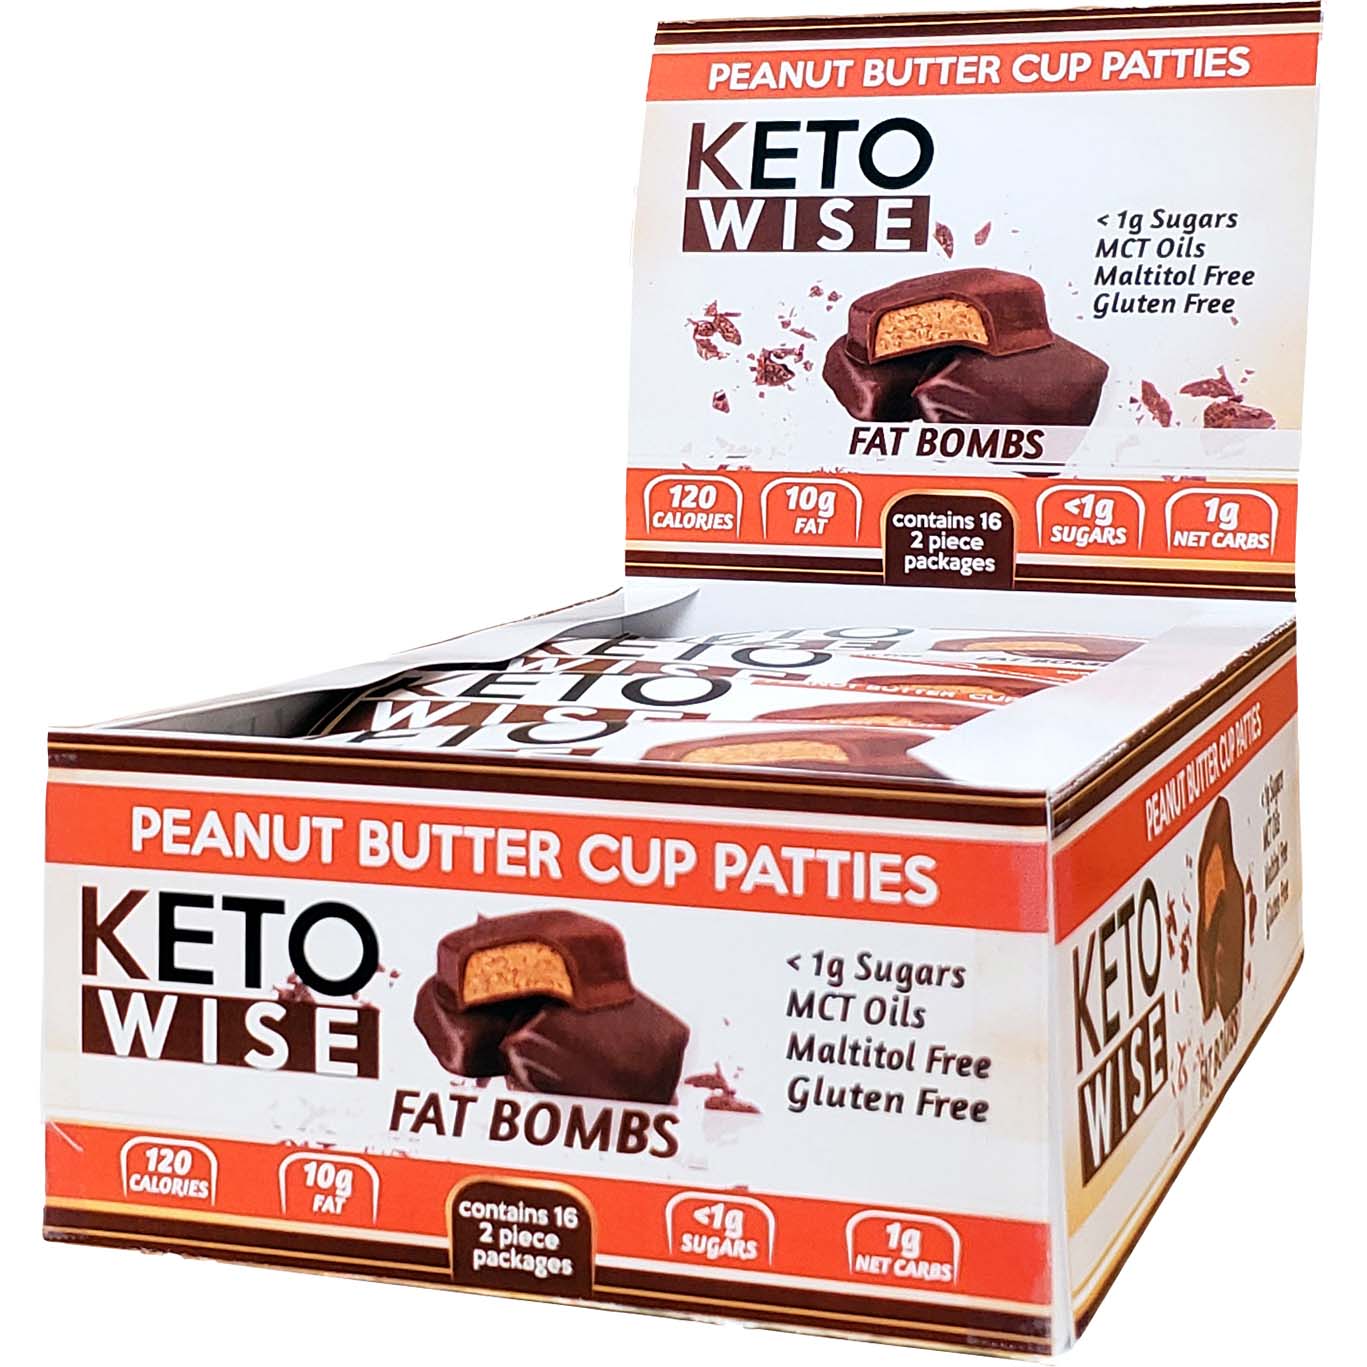 Keto Wise Fat Bombs Box of 16 Pieces Peanut Butter Cup Patties